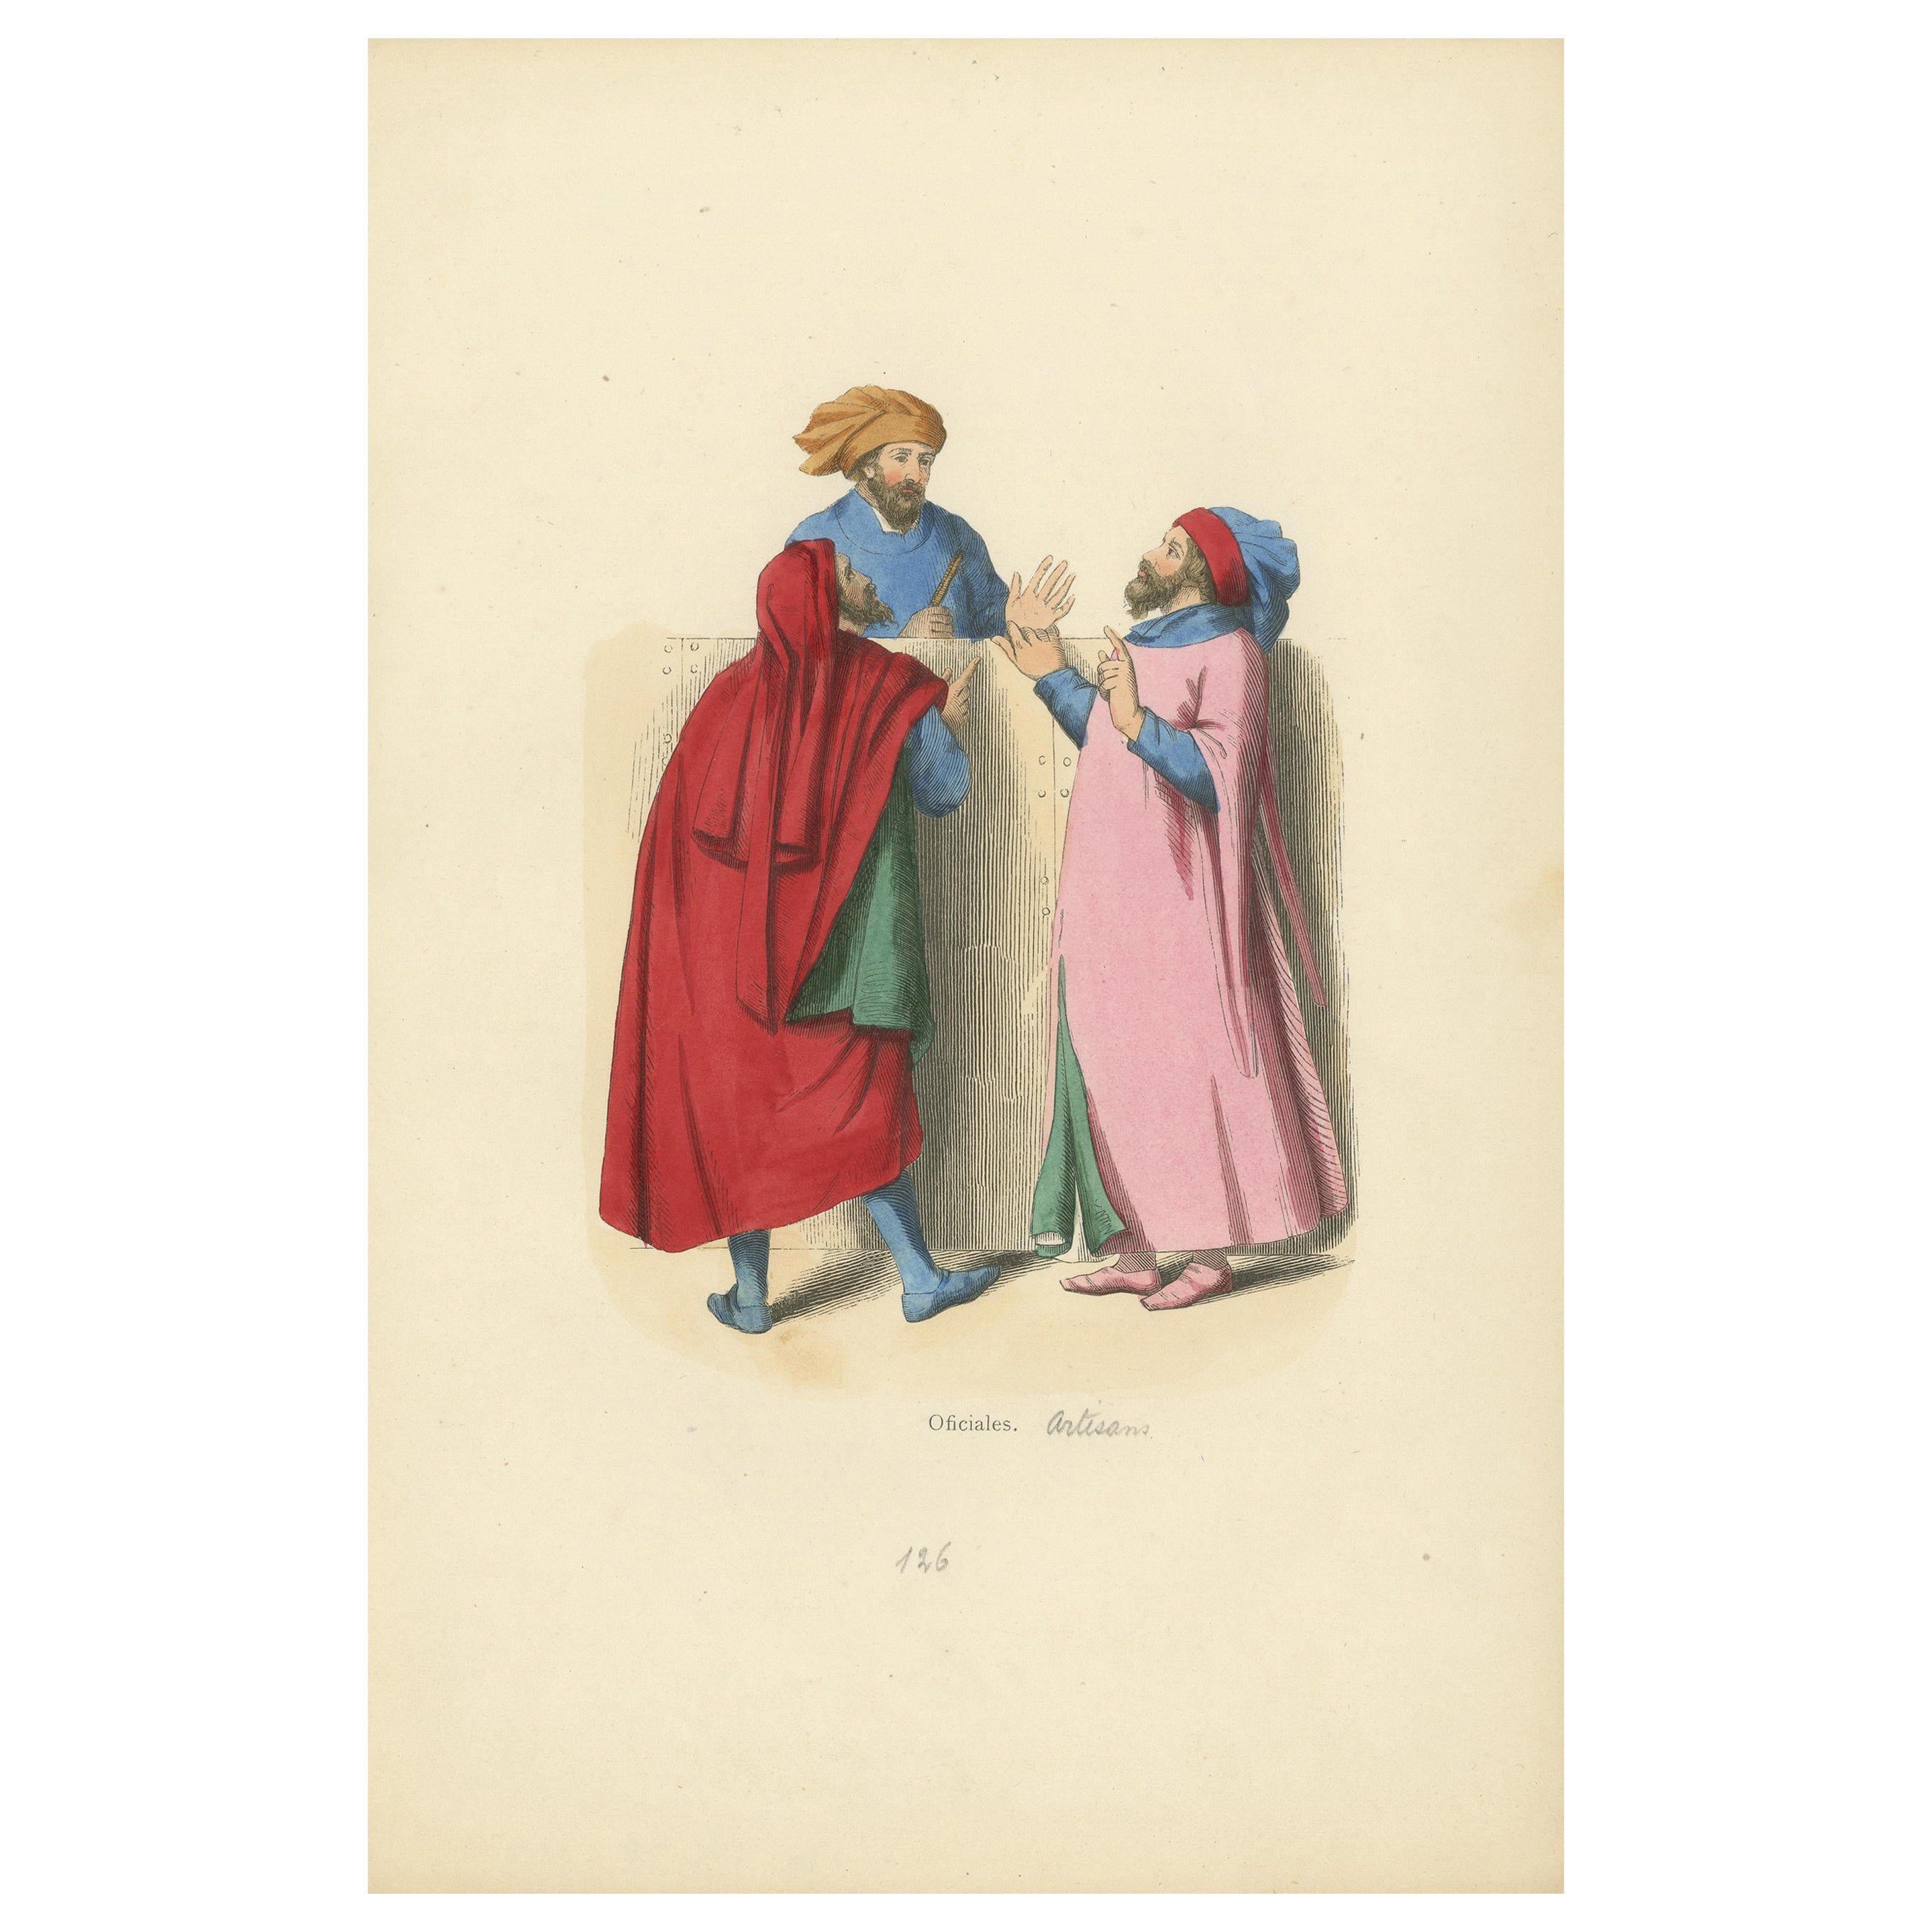 Medieval Discourse: A Moment Between Officials or Artists, Published in 1847